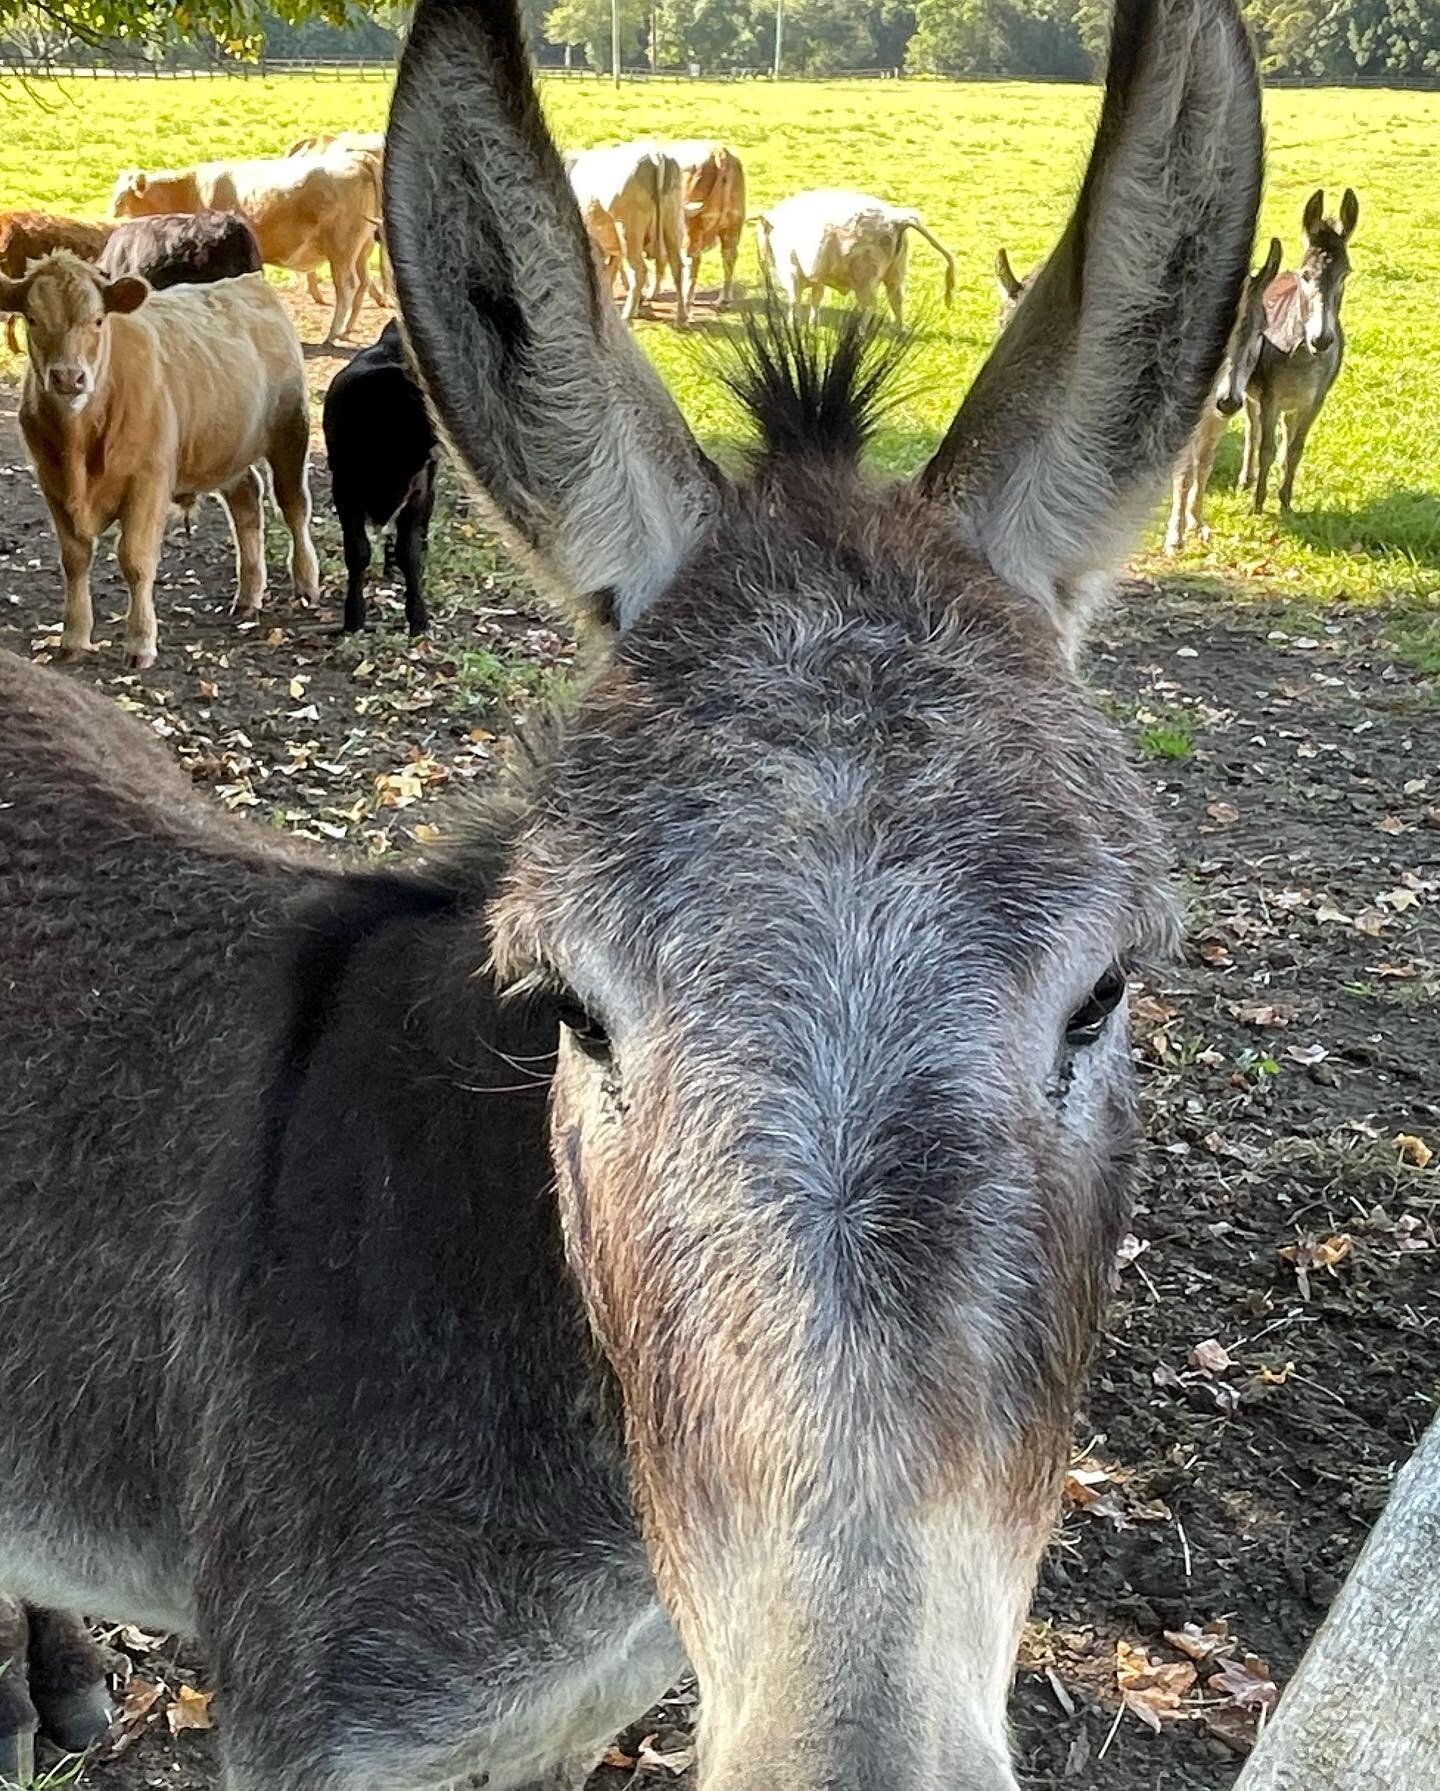 Amber Lane open day today! Noon until 4pm. Come and try some fantastic whisky in the Yarramalong Valley. Hughie the donkey is keen to say hello! #no2sleighbells #apera87